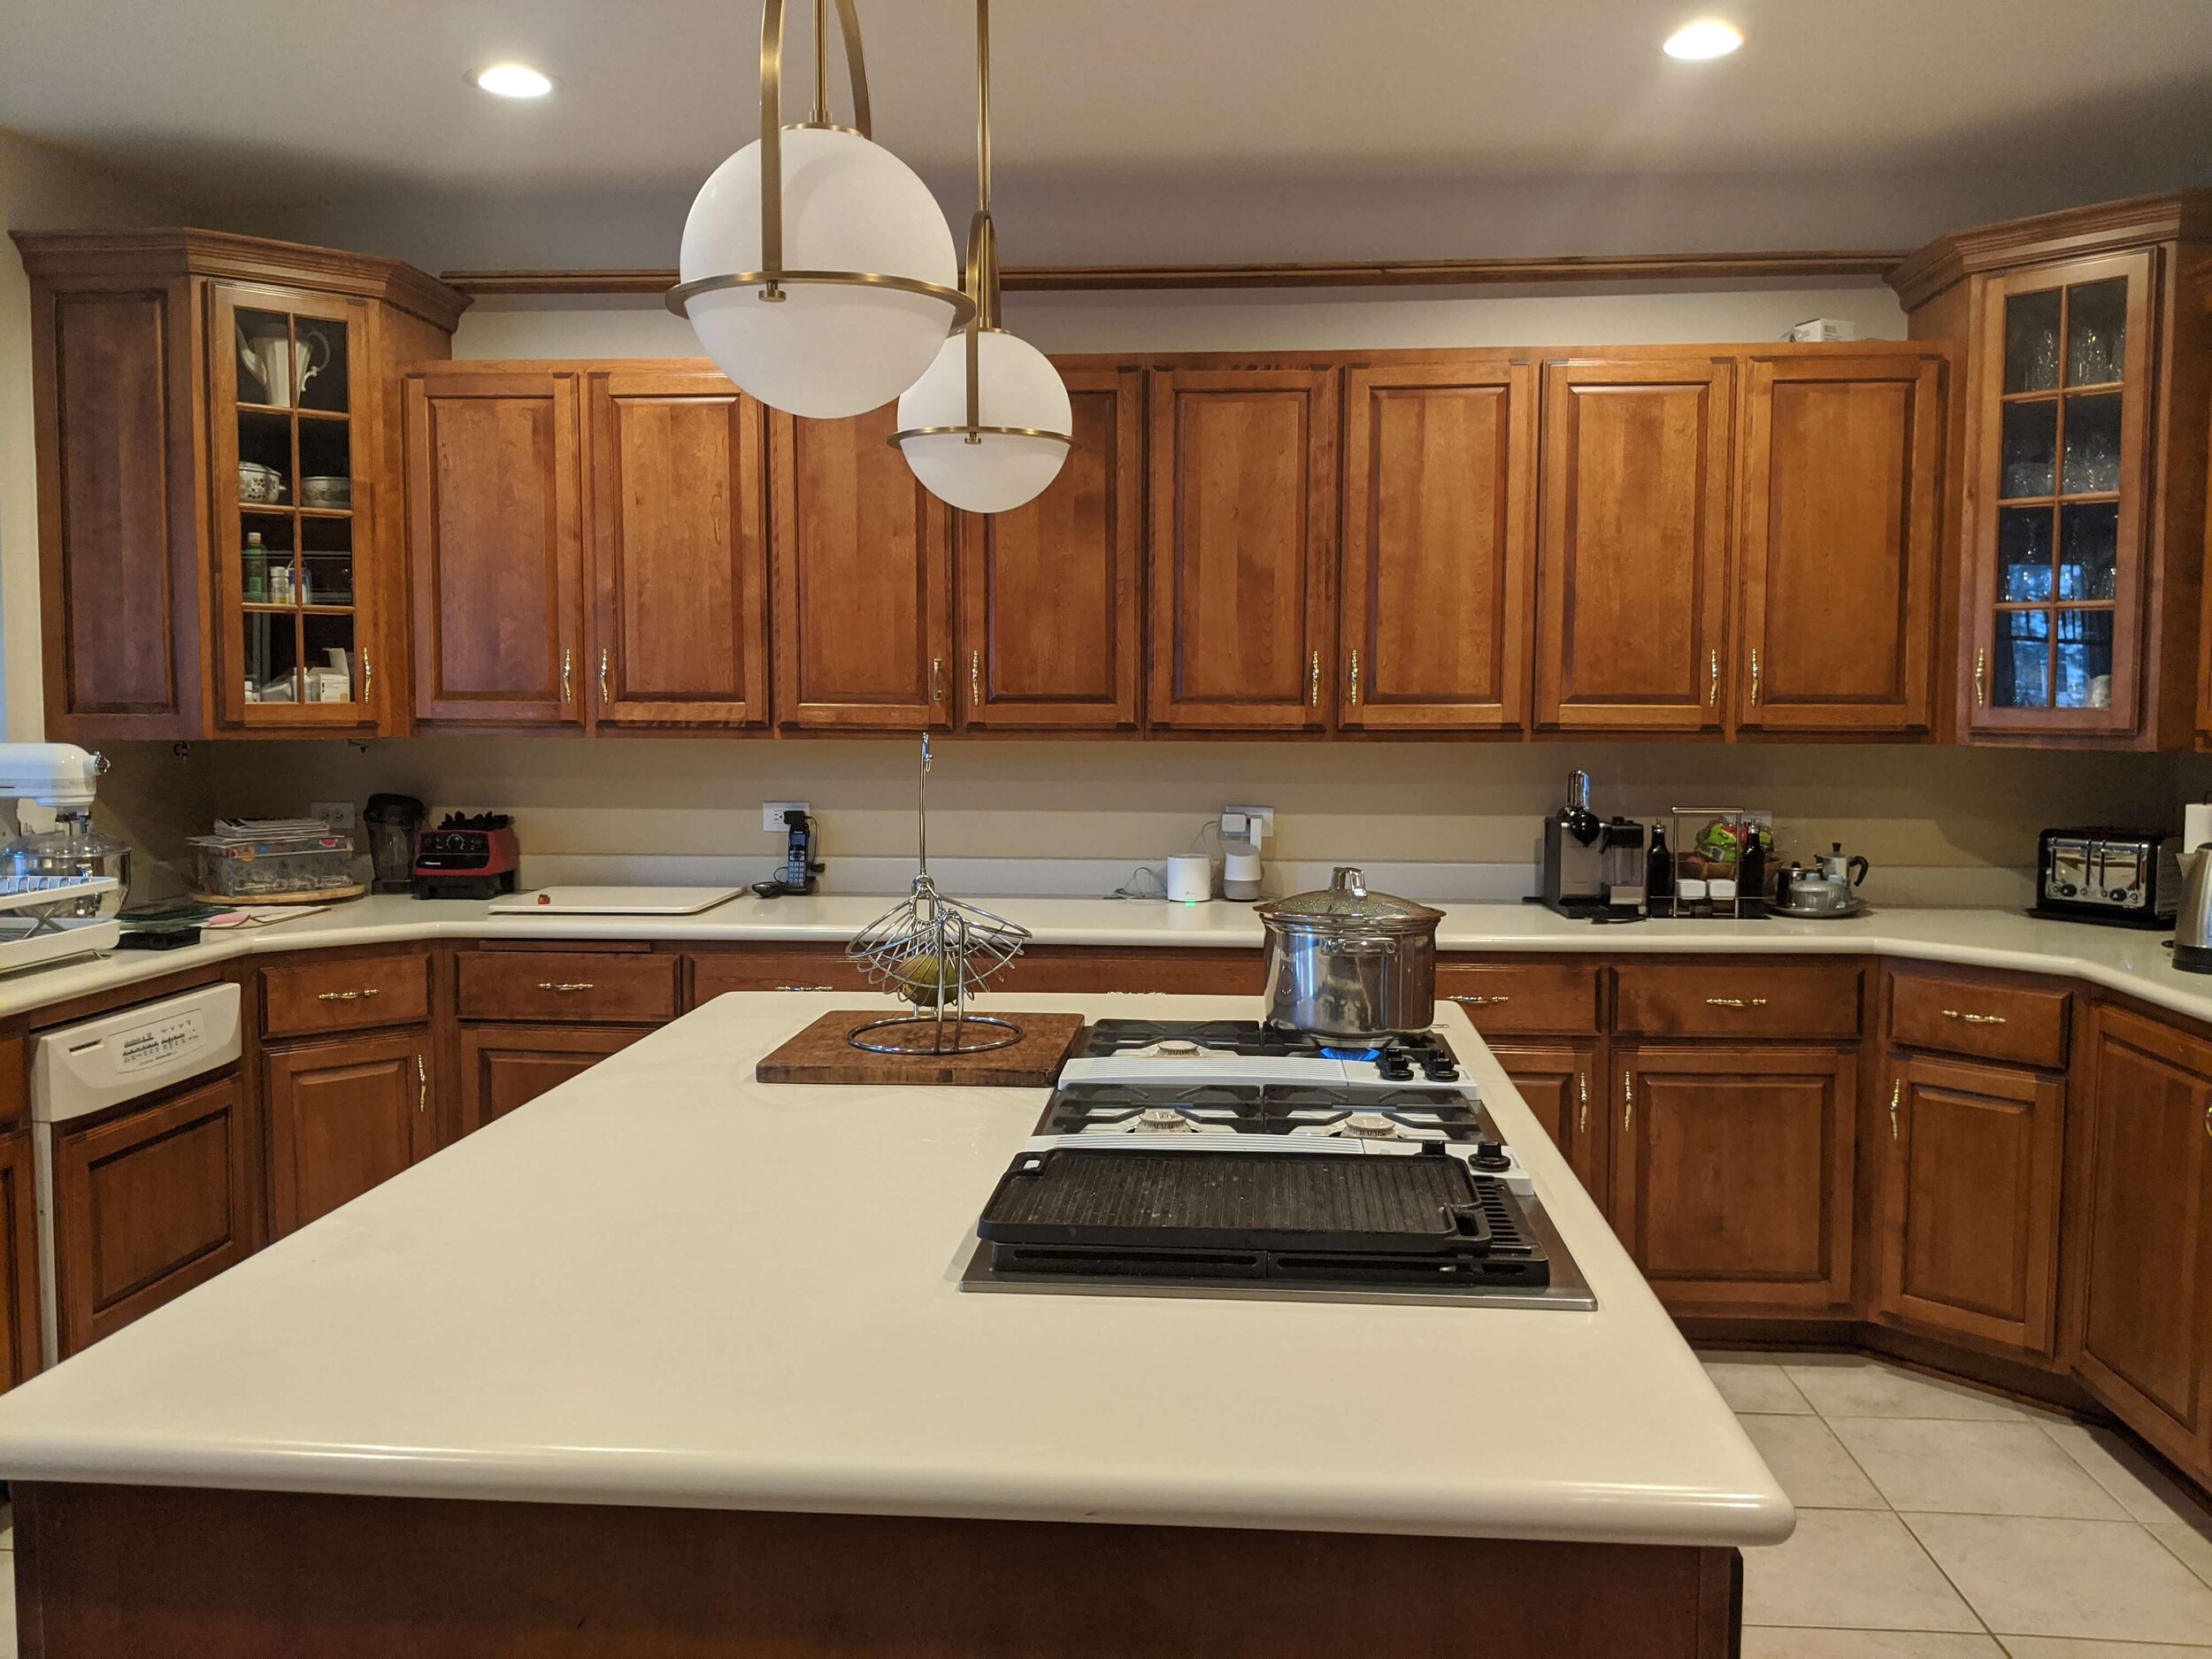 Wood Cabinets Without Painting, Oak Kitchen Cabinets With Quartz Countertops